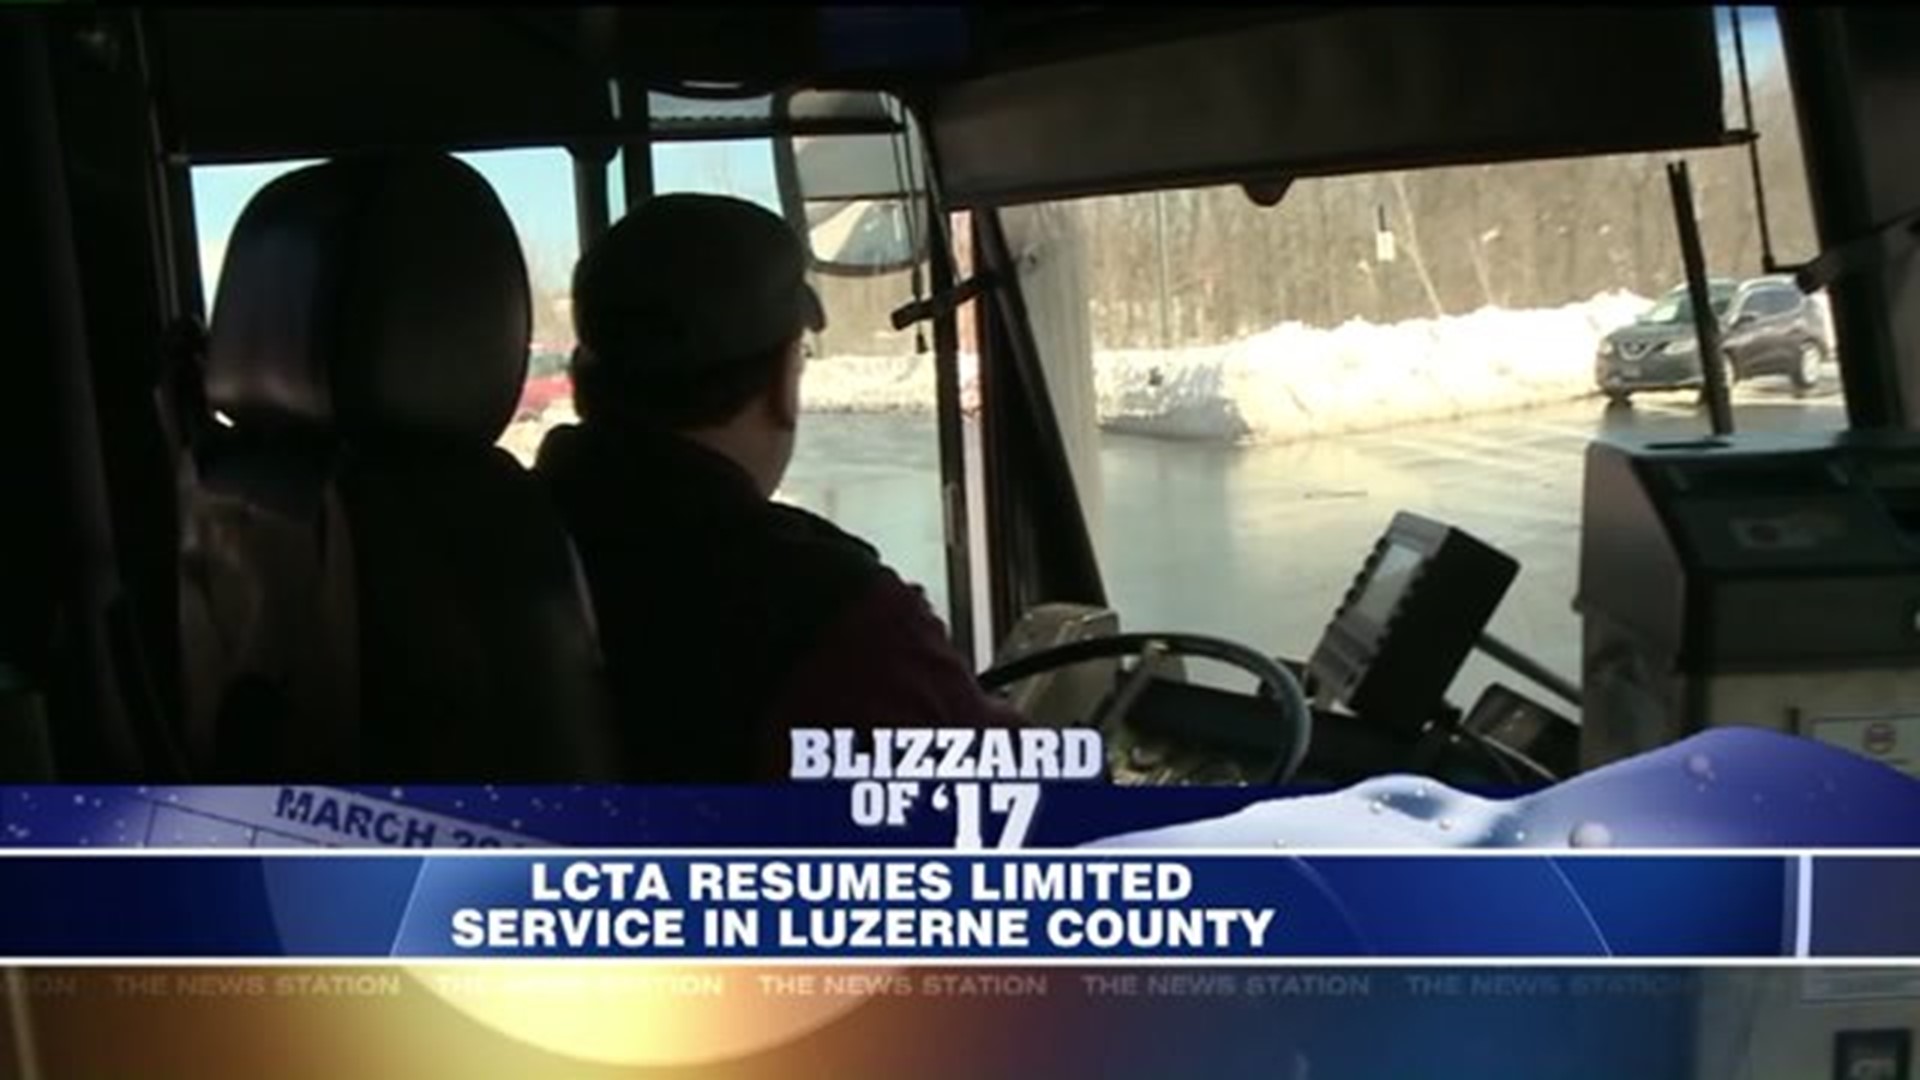 LCTA Resumes Limited Service in Luzerne County